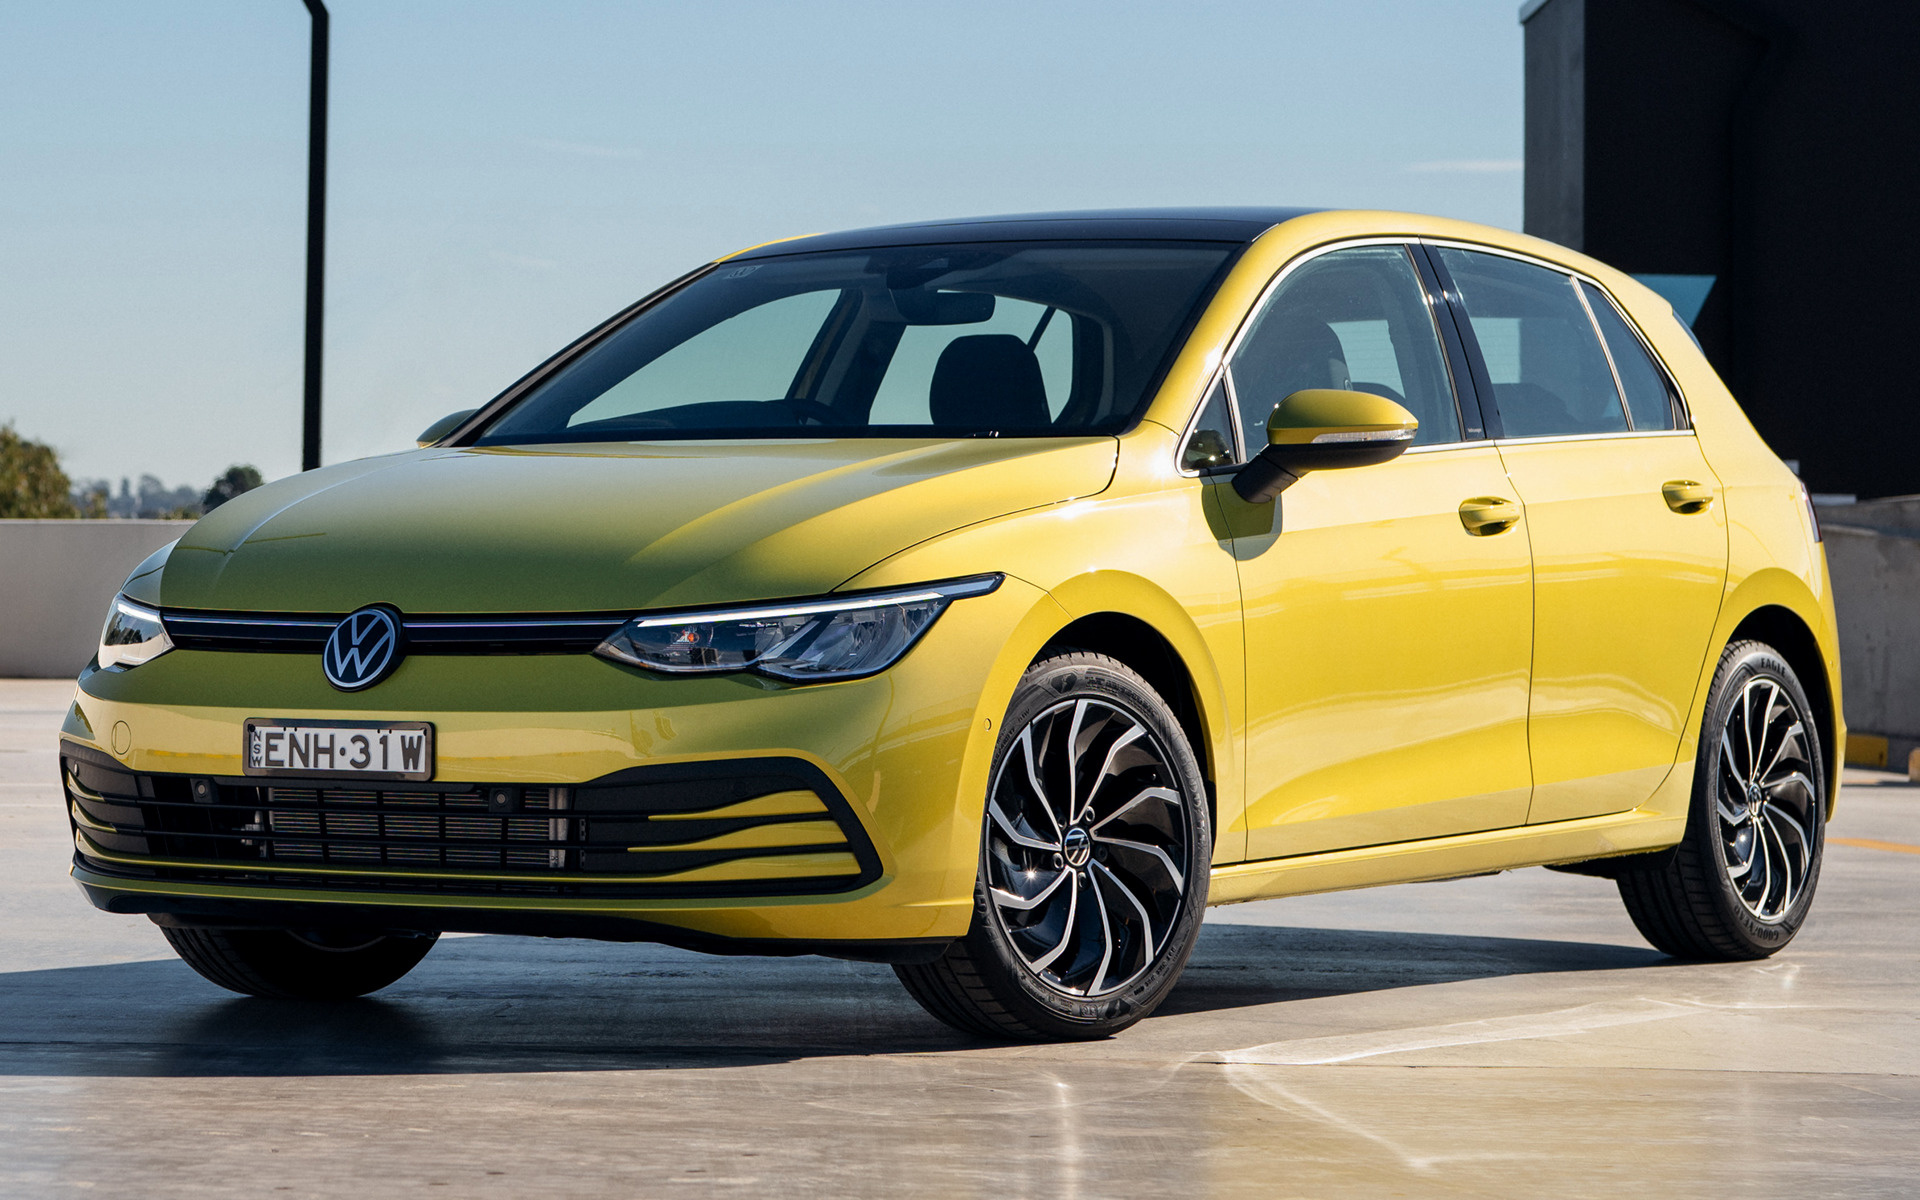 2021 Volkswagen Golf (AU) - Wallpapers and HD Images | Car Pixel